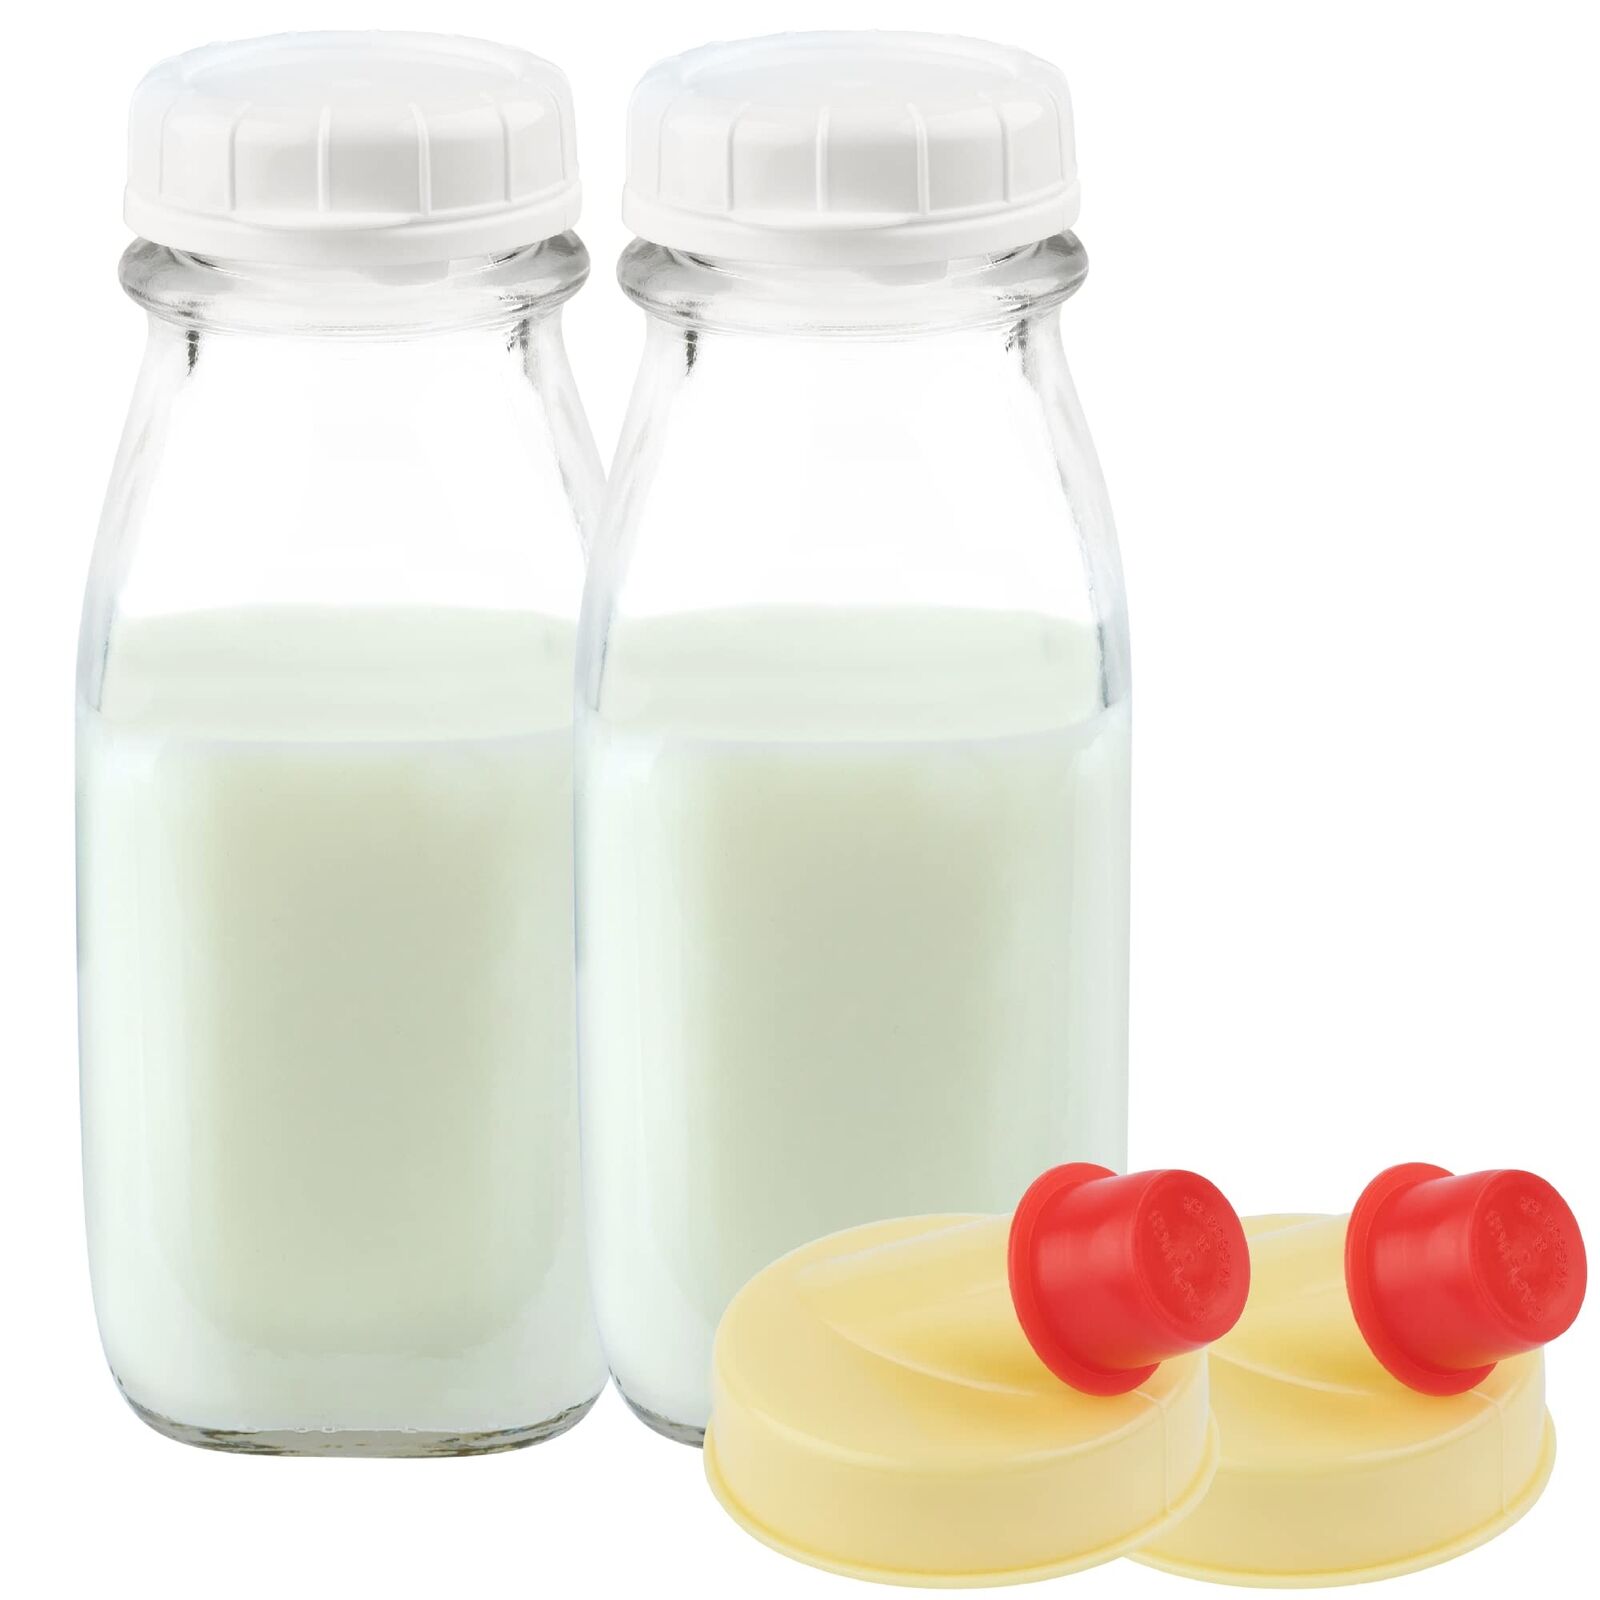 12 Oz Square Glass Milk Jugs with Caps - Perfect Milk Container for Refrigera...